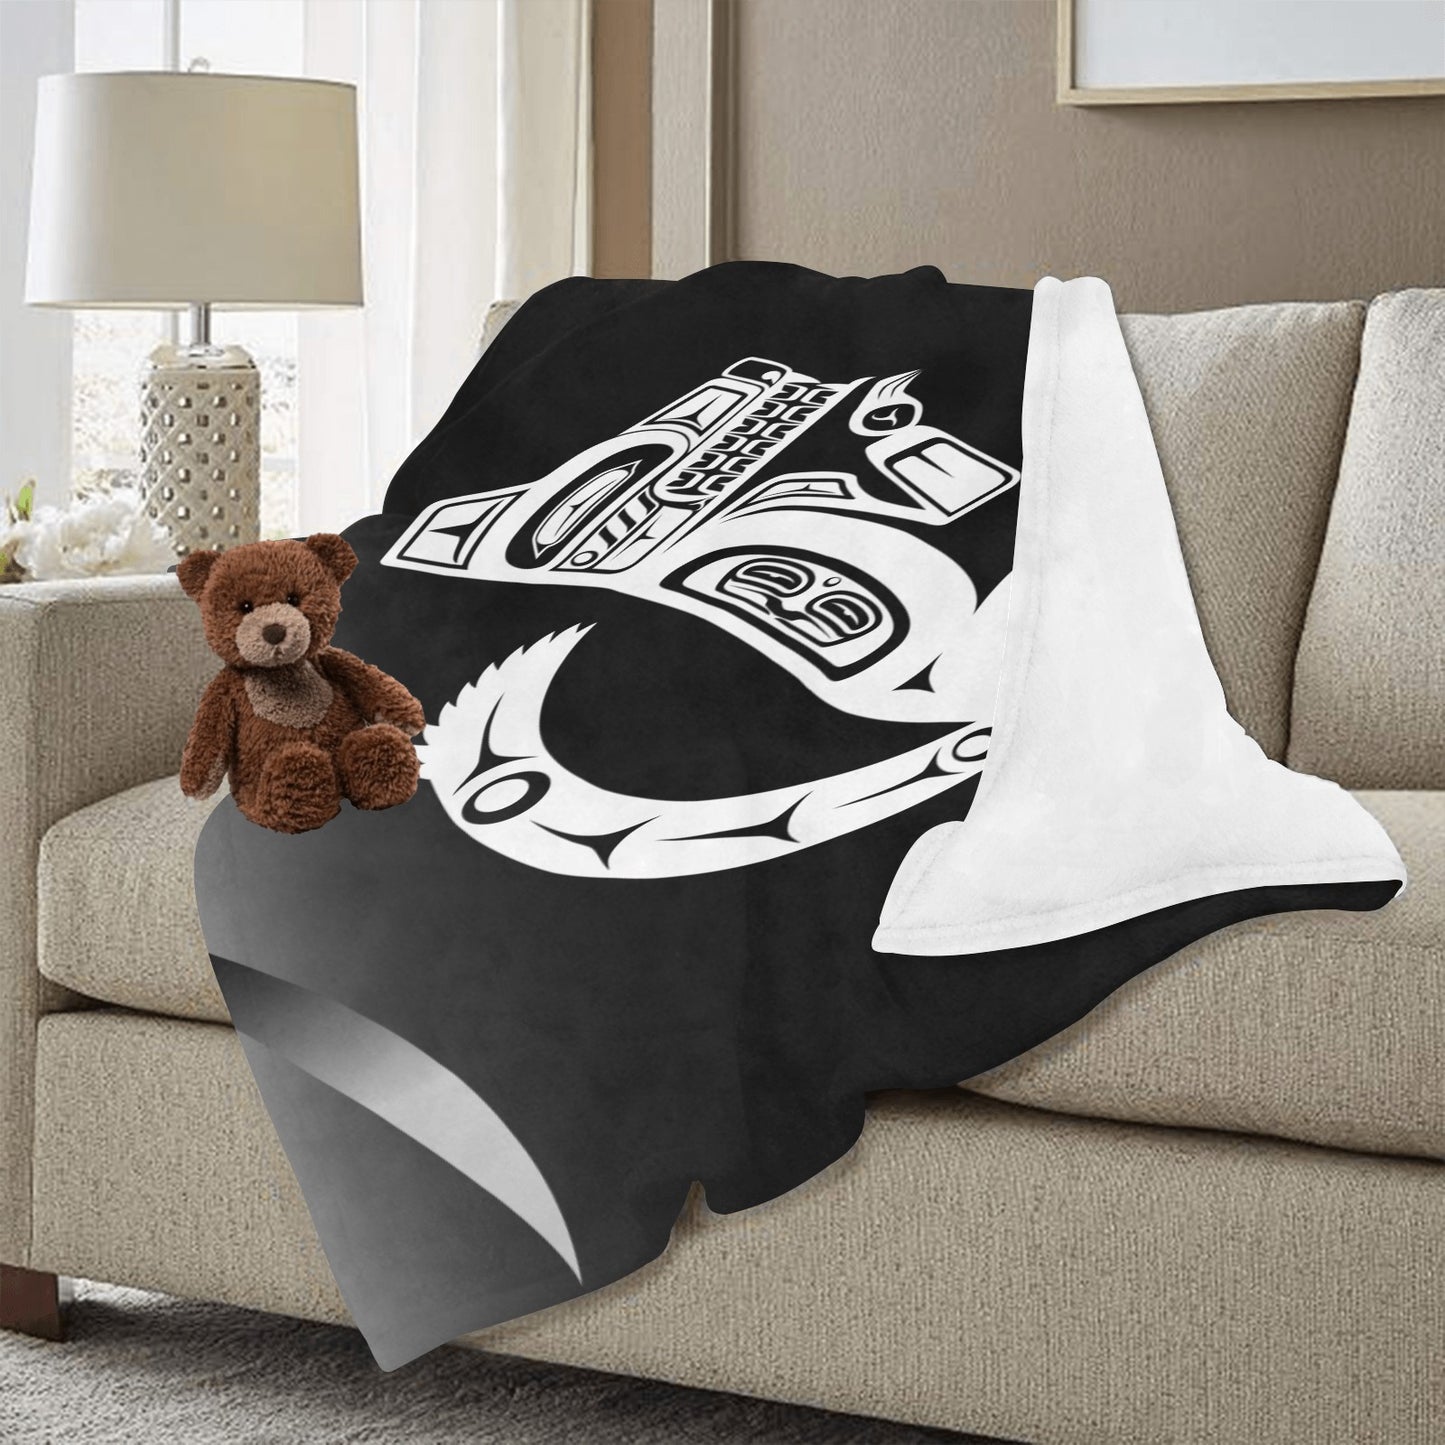 Wolf White on Black Ultra-Soft Micro Fleece Blanket 60"x80" (Thick)